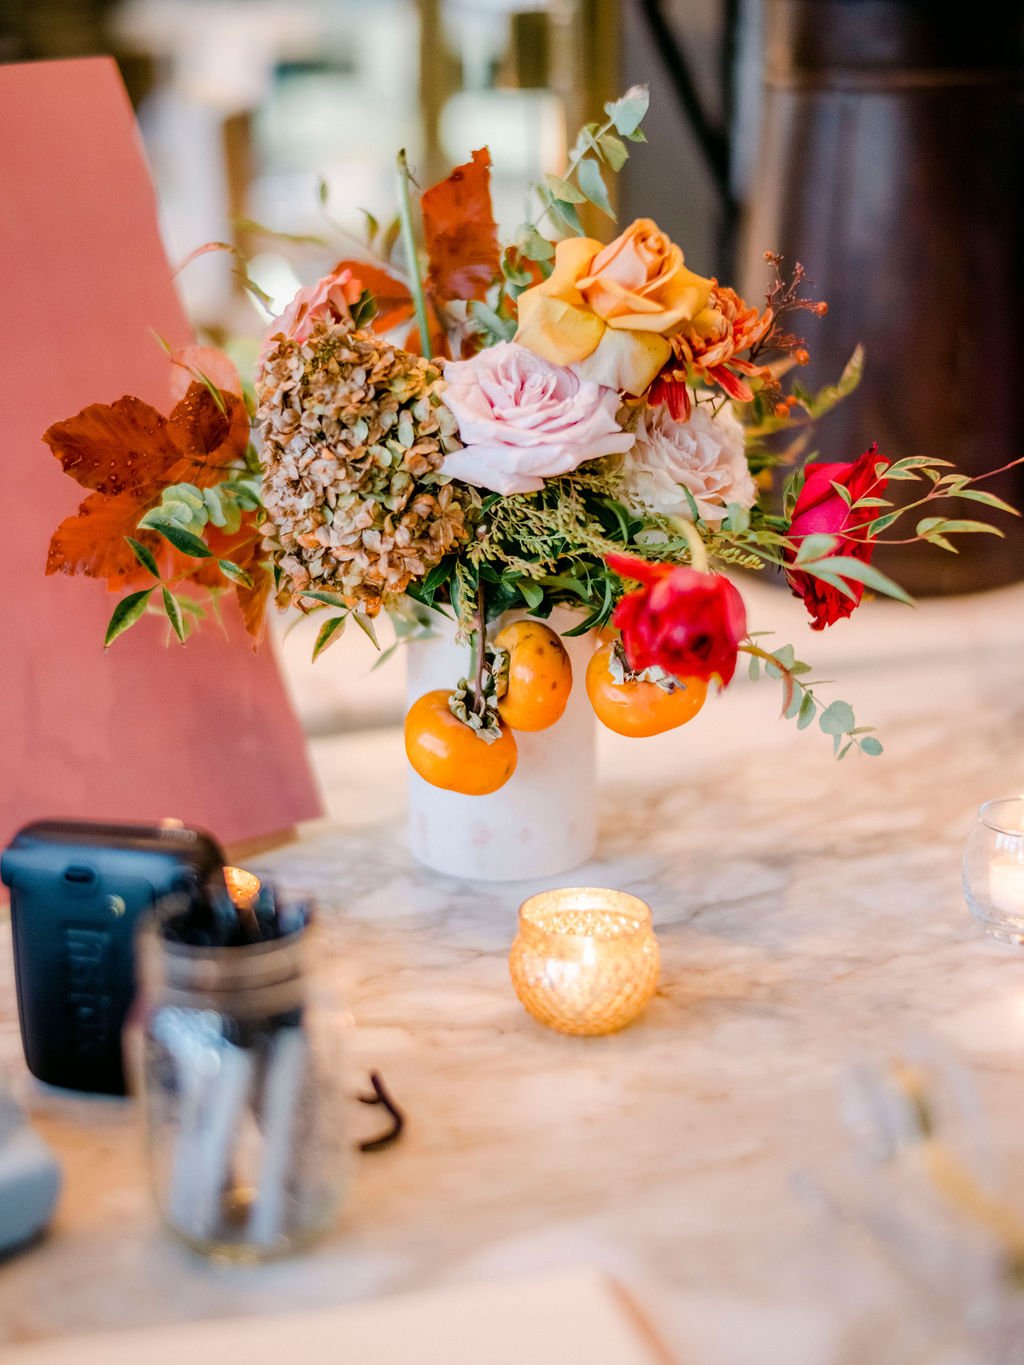 Dainty bud vases of tulips, ranunculus, and fall foliage accenting the reception space. Buds offering pops of warm color and elegance to the smaller spaces of the St. Cecilia restaurant. Floral design by Rosemary and Finch in Nashville, TN.